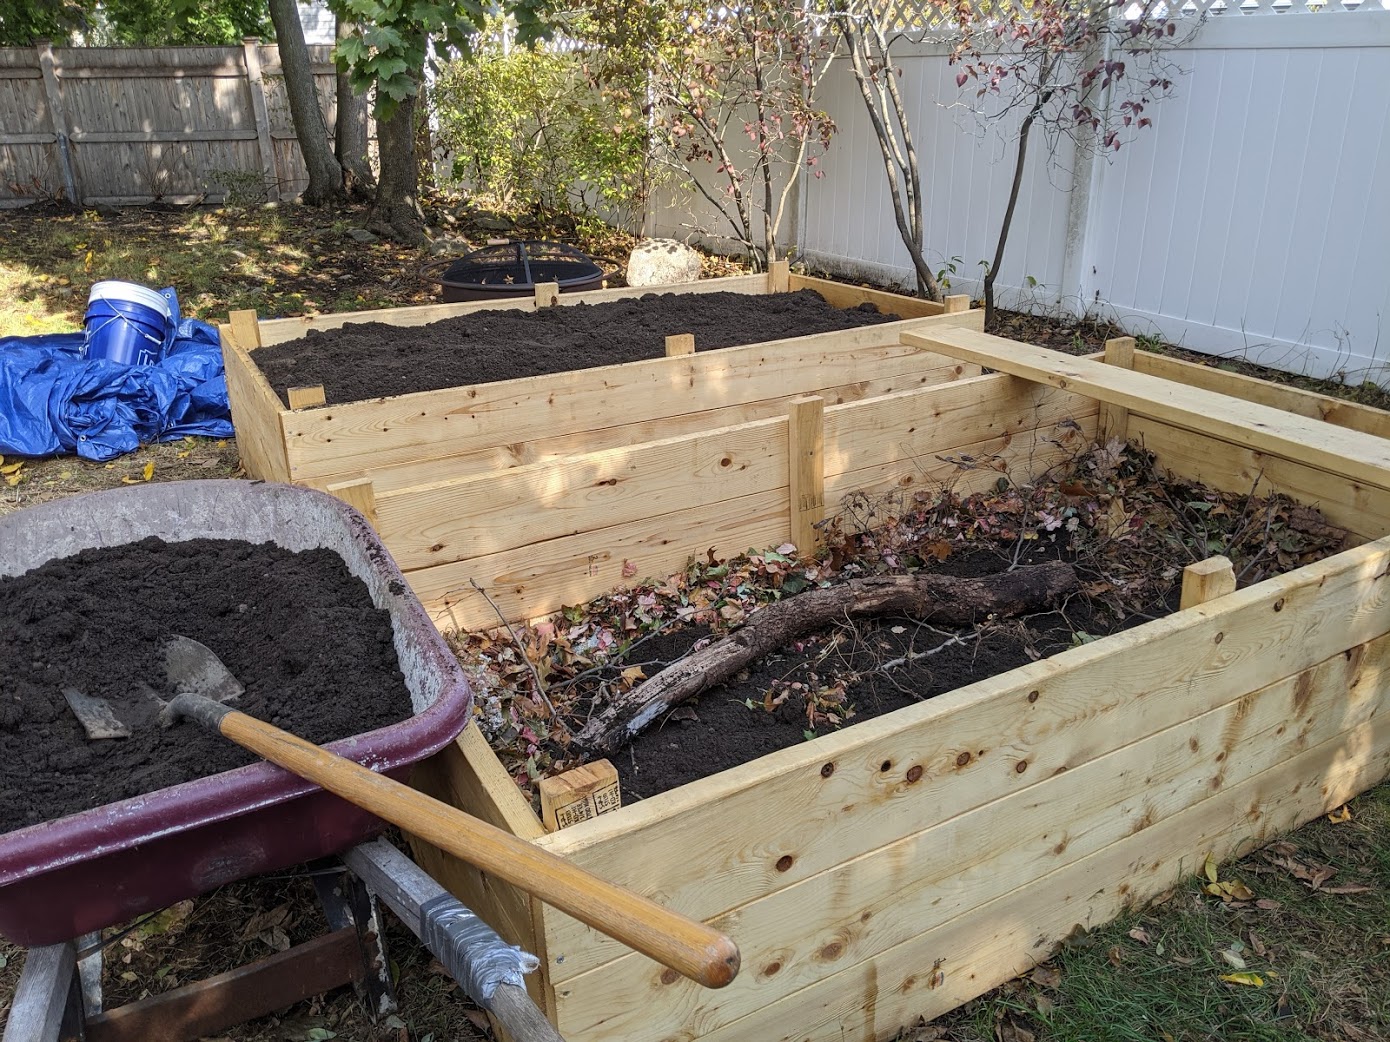 Two raised beds in the back yard, one filled, one partially filled with
woody debris